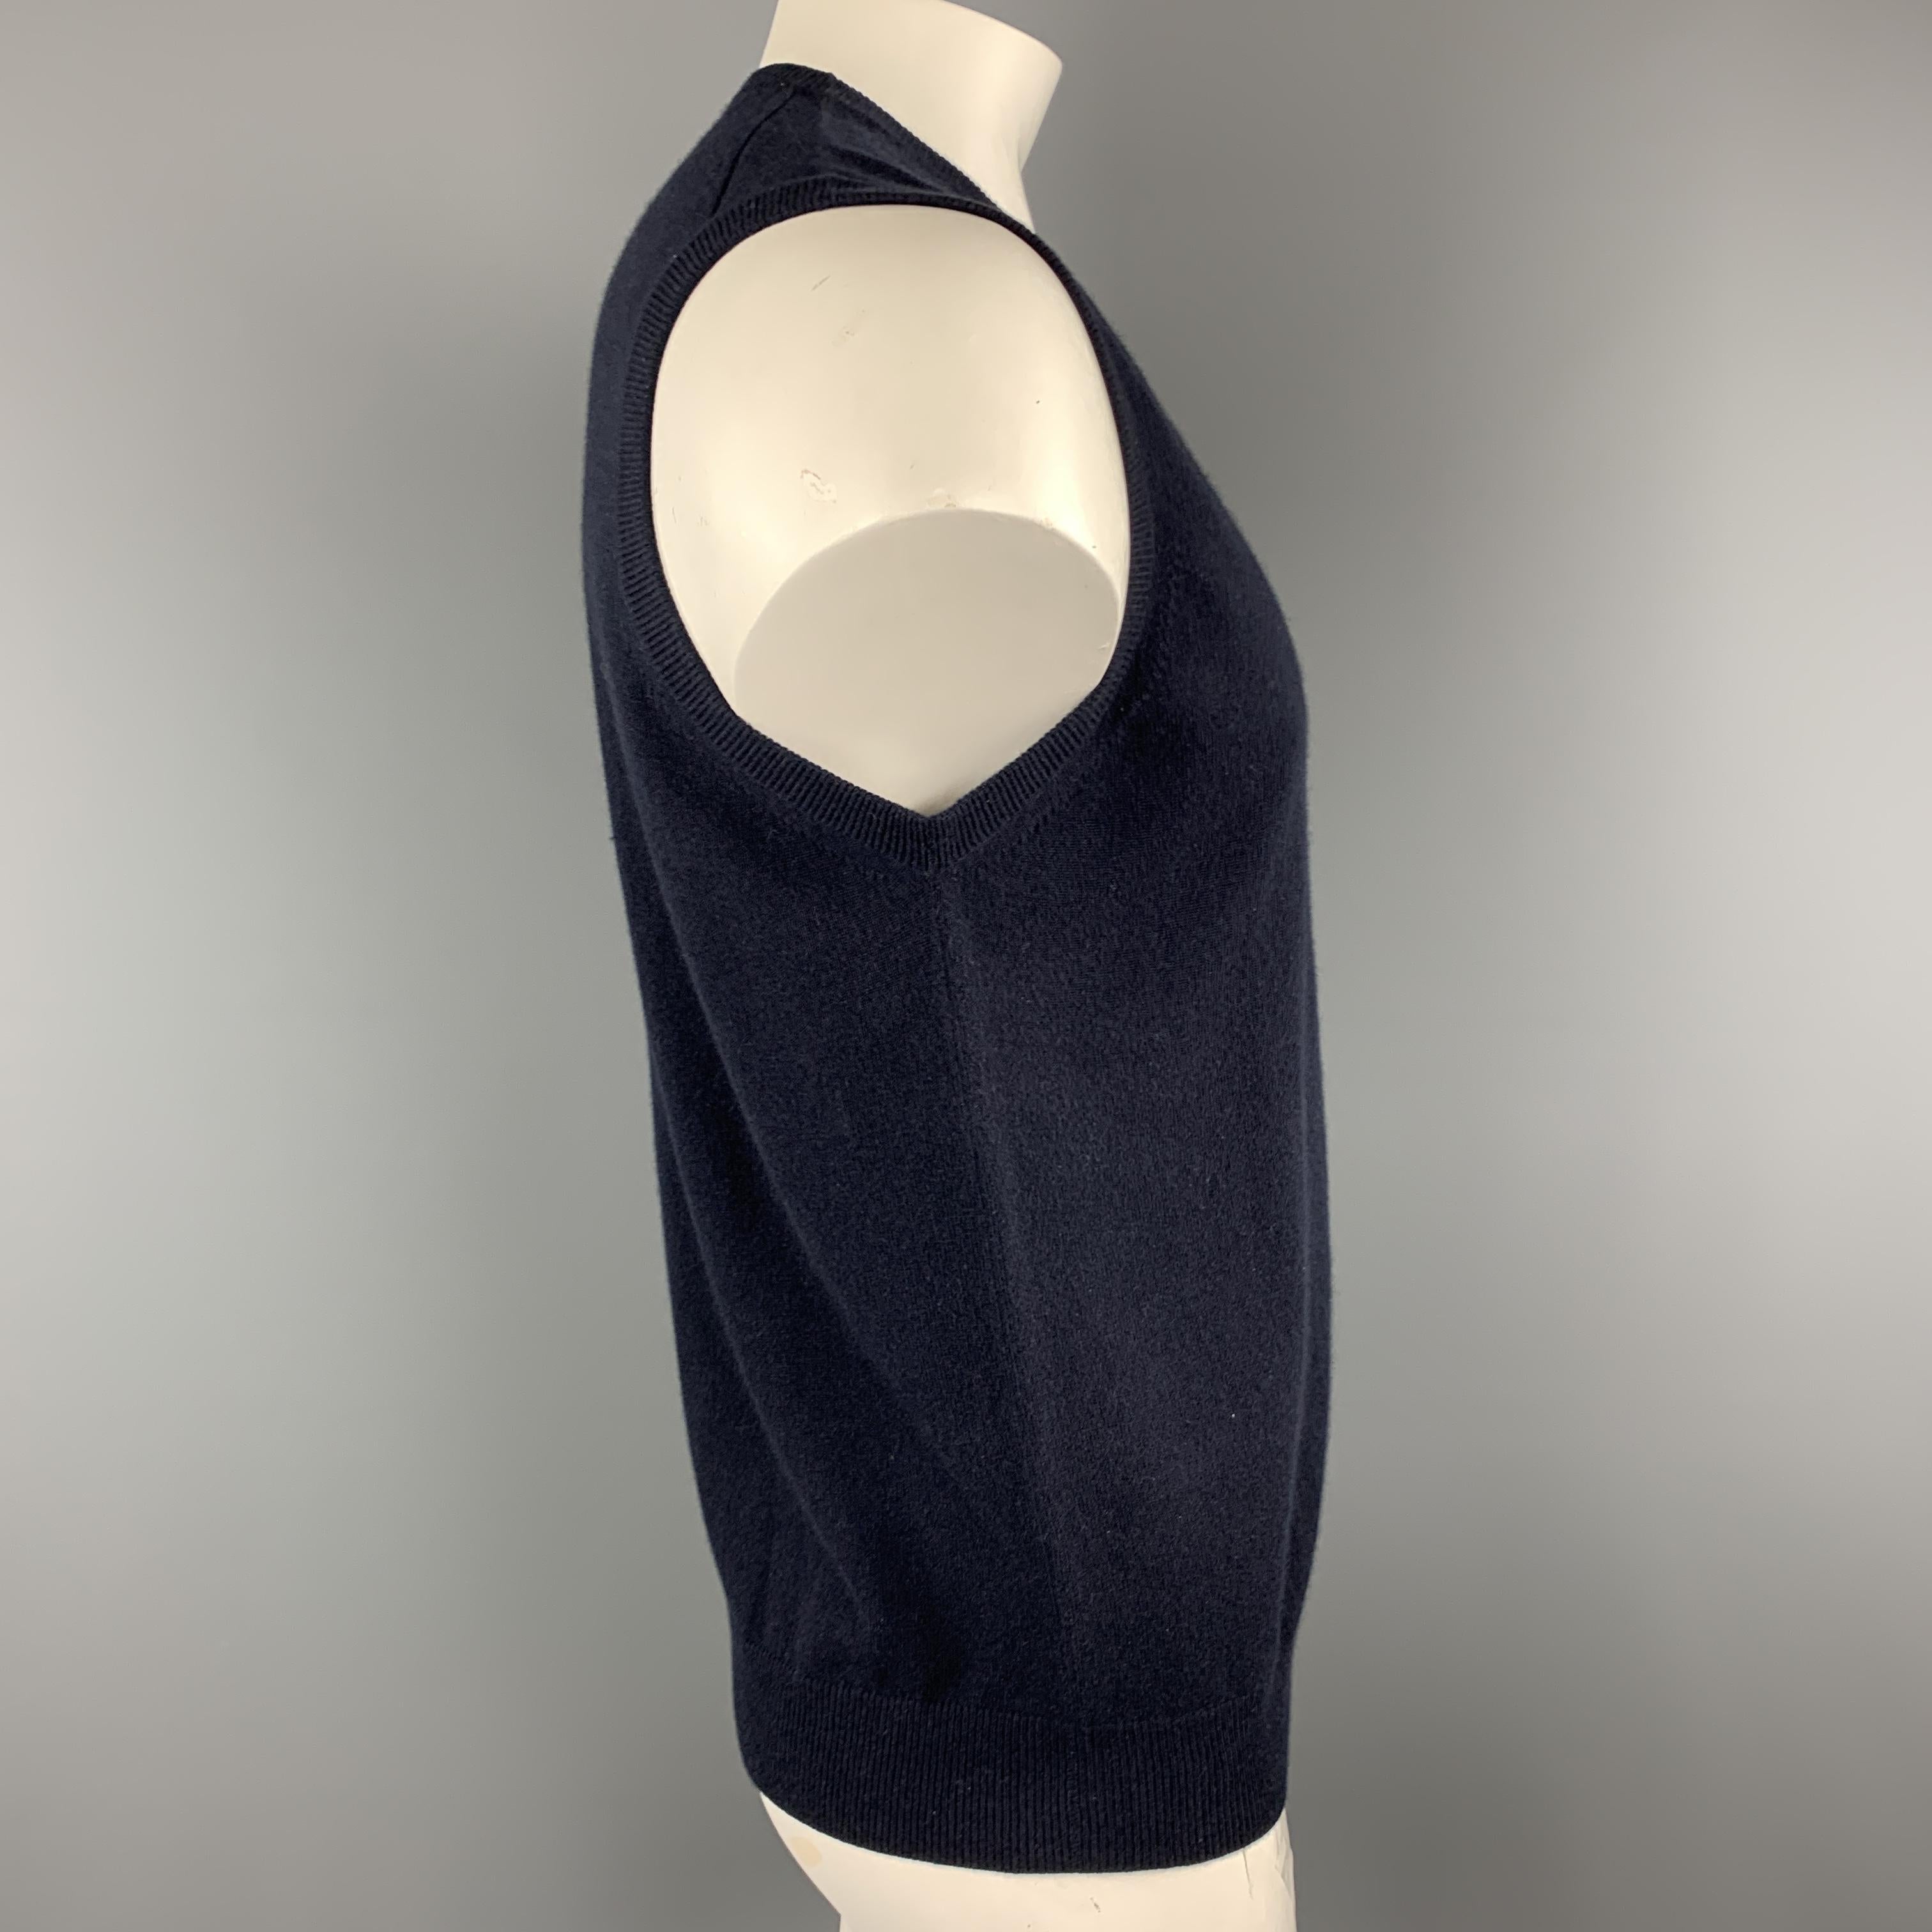 N. PEAL sweater vest comes in cashmere knit with a v neck.

Excellent Pre-Owned Condition.
Marked: L

Measurements:

Shoulder: 18 in.
Chest: 44 in.
Length: 27 in.